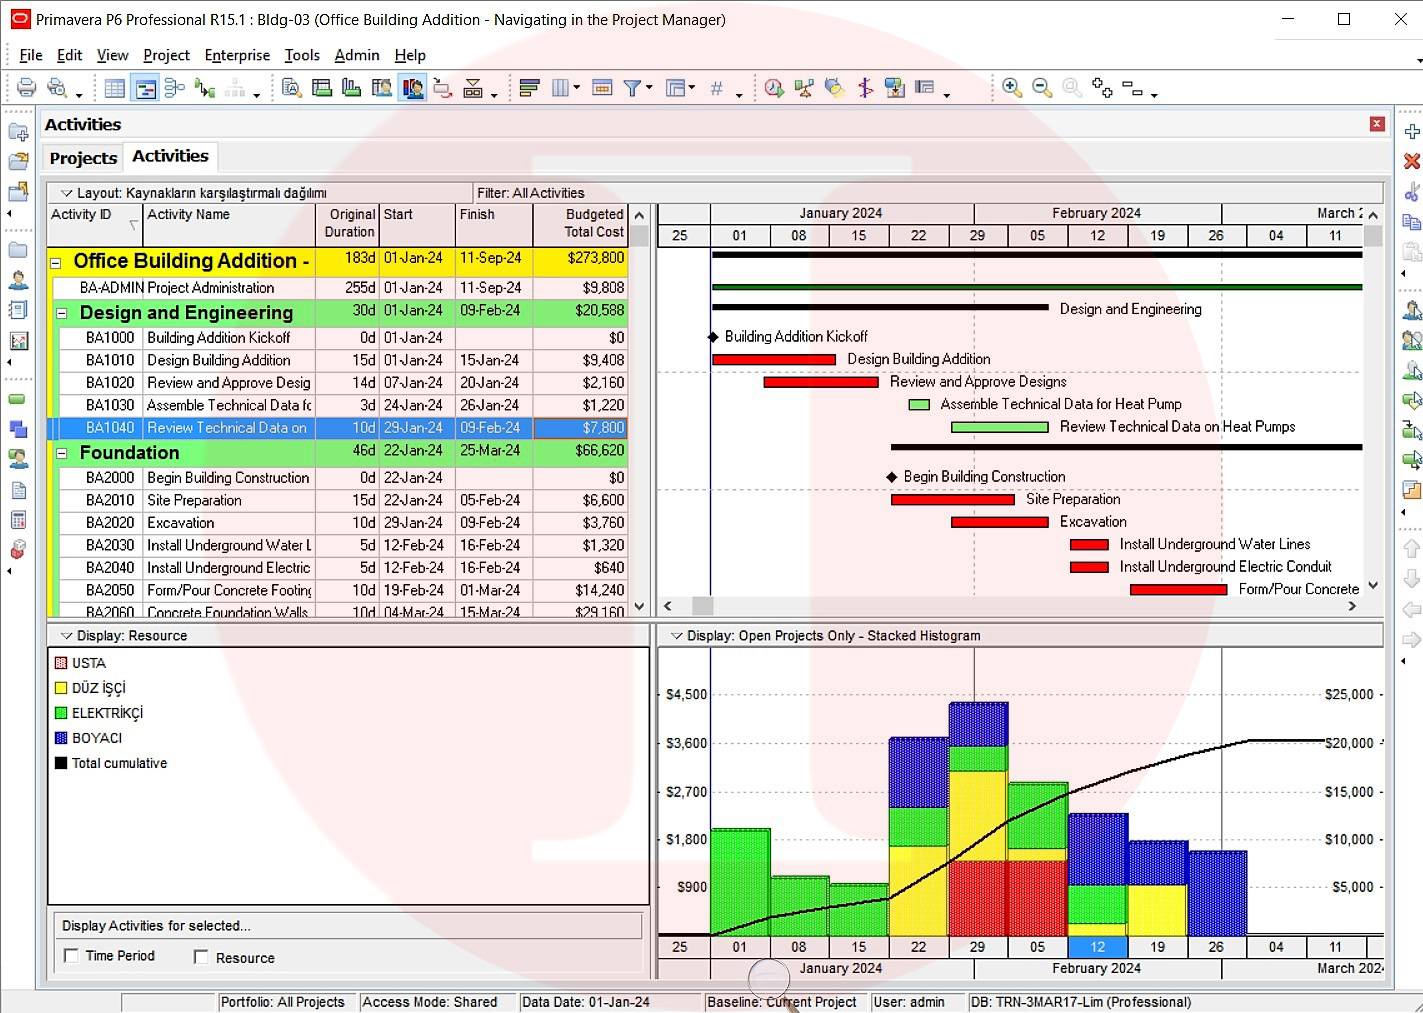 Planning and Scheduling with Primavera | Akim Engineering